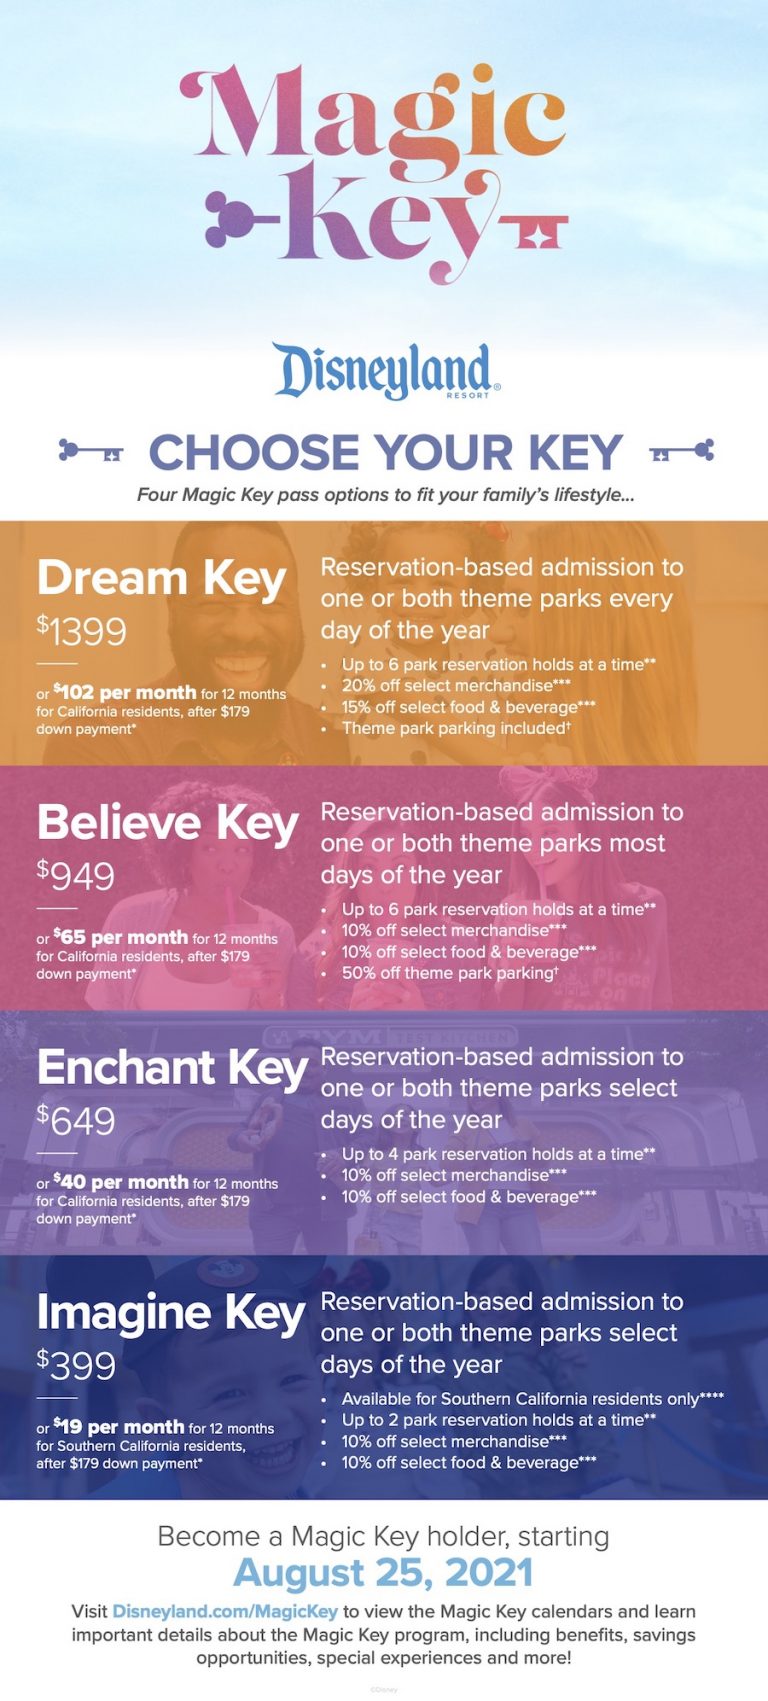 NEWS Another Disneyland Resort Magic Key Pass Has SOLD OUT Disney by